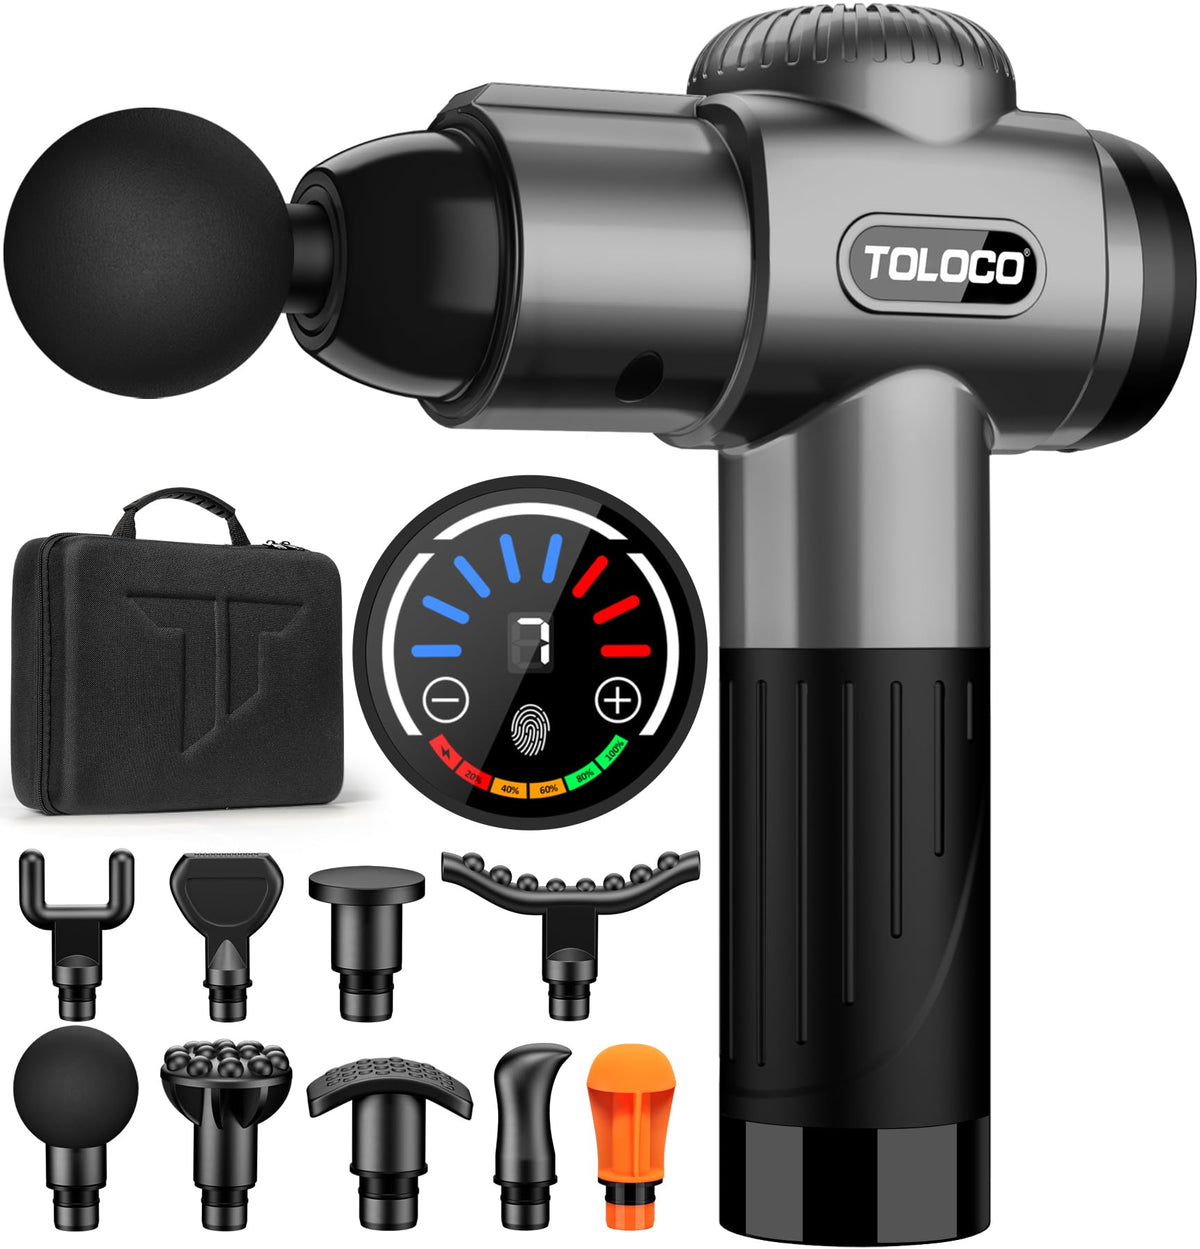 TOLOCO Massage Gun, Muscle Massage Gun Deep Tissue for Athletes, Portable Percussion Massager with 10 Massage Heads, Electric Body Massager for Any Pain Relief, Grey